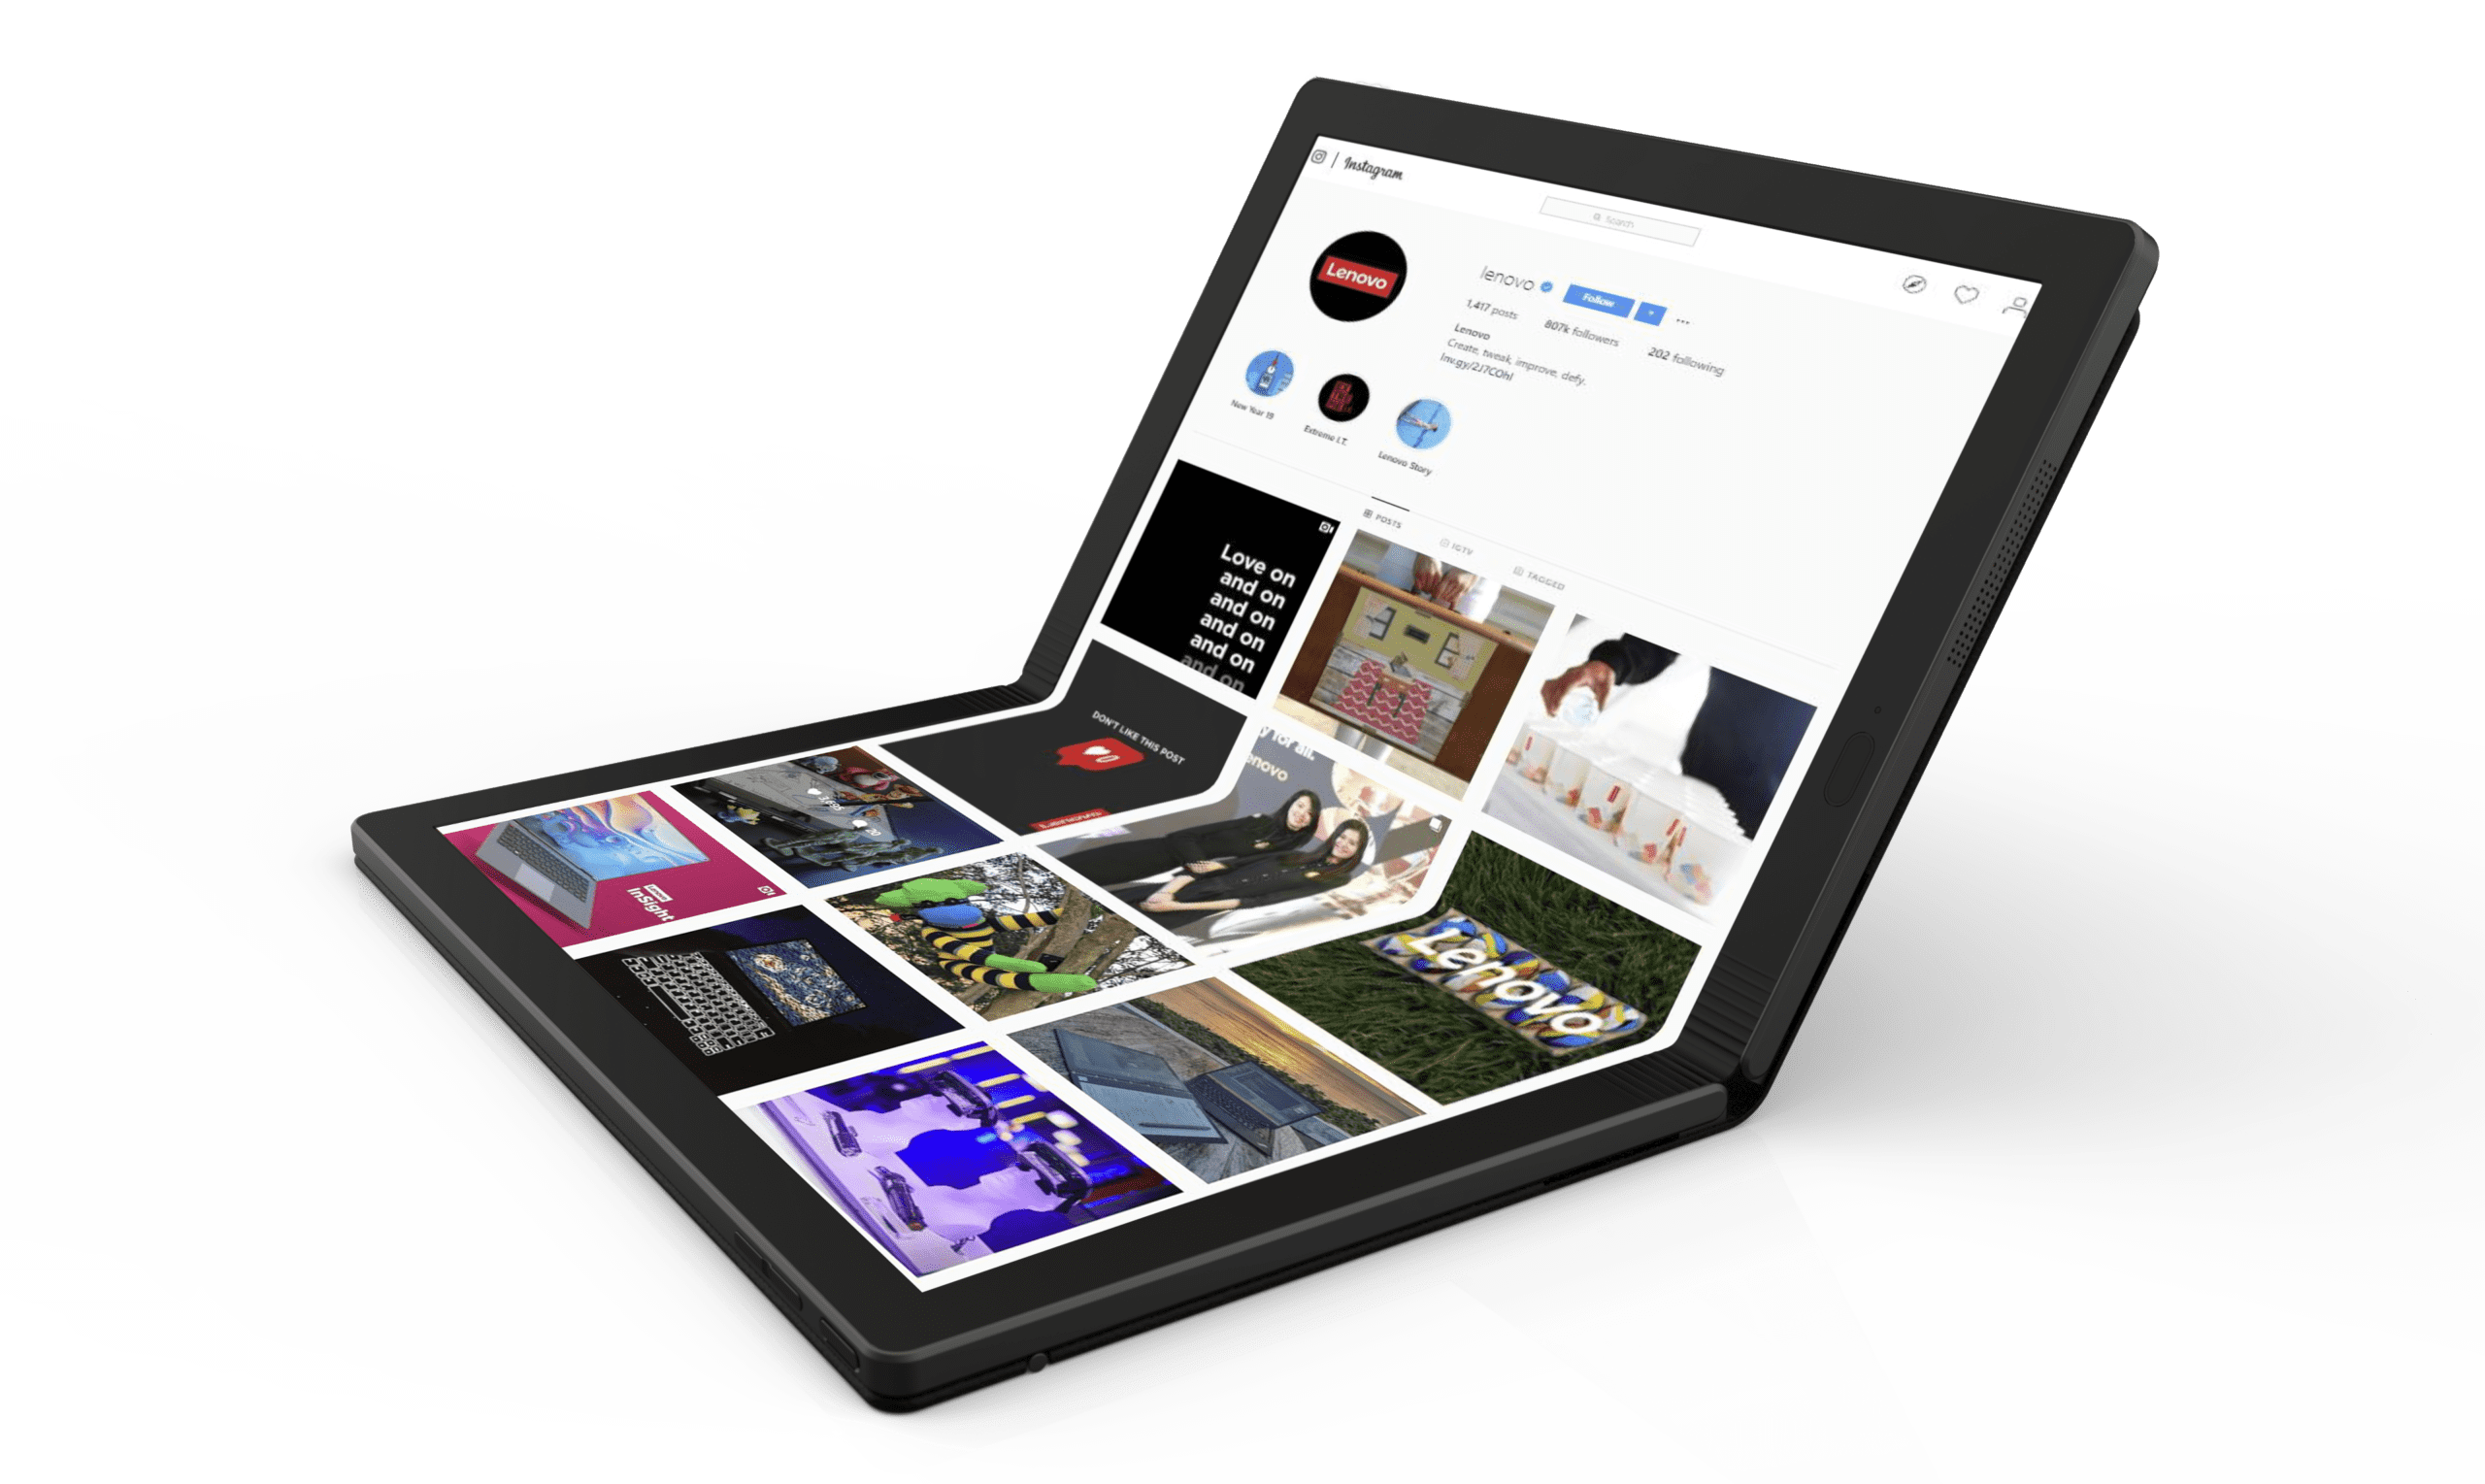 The first foldable PC era is unfolding